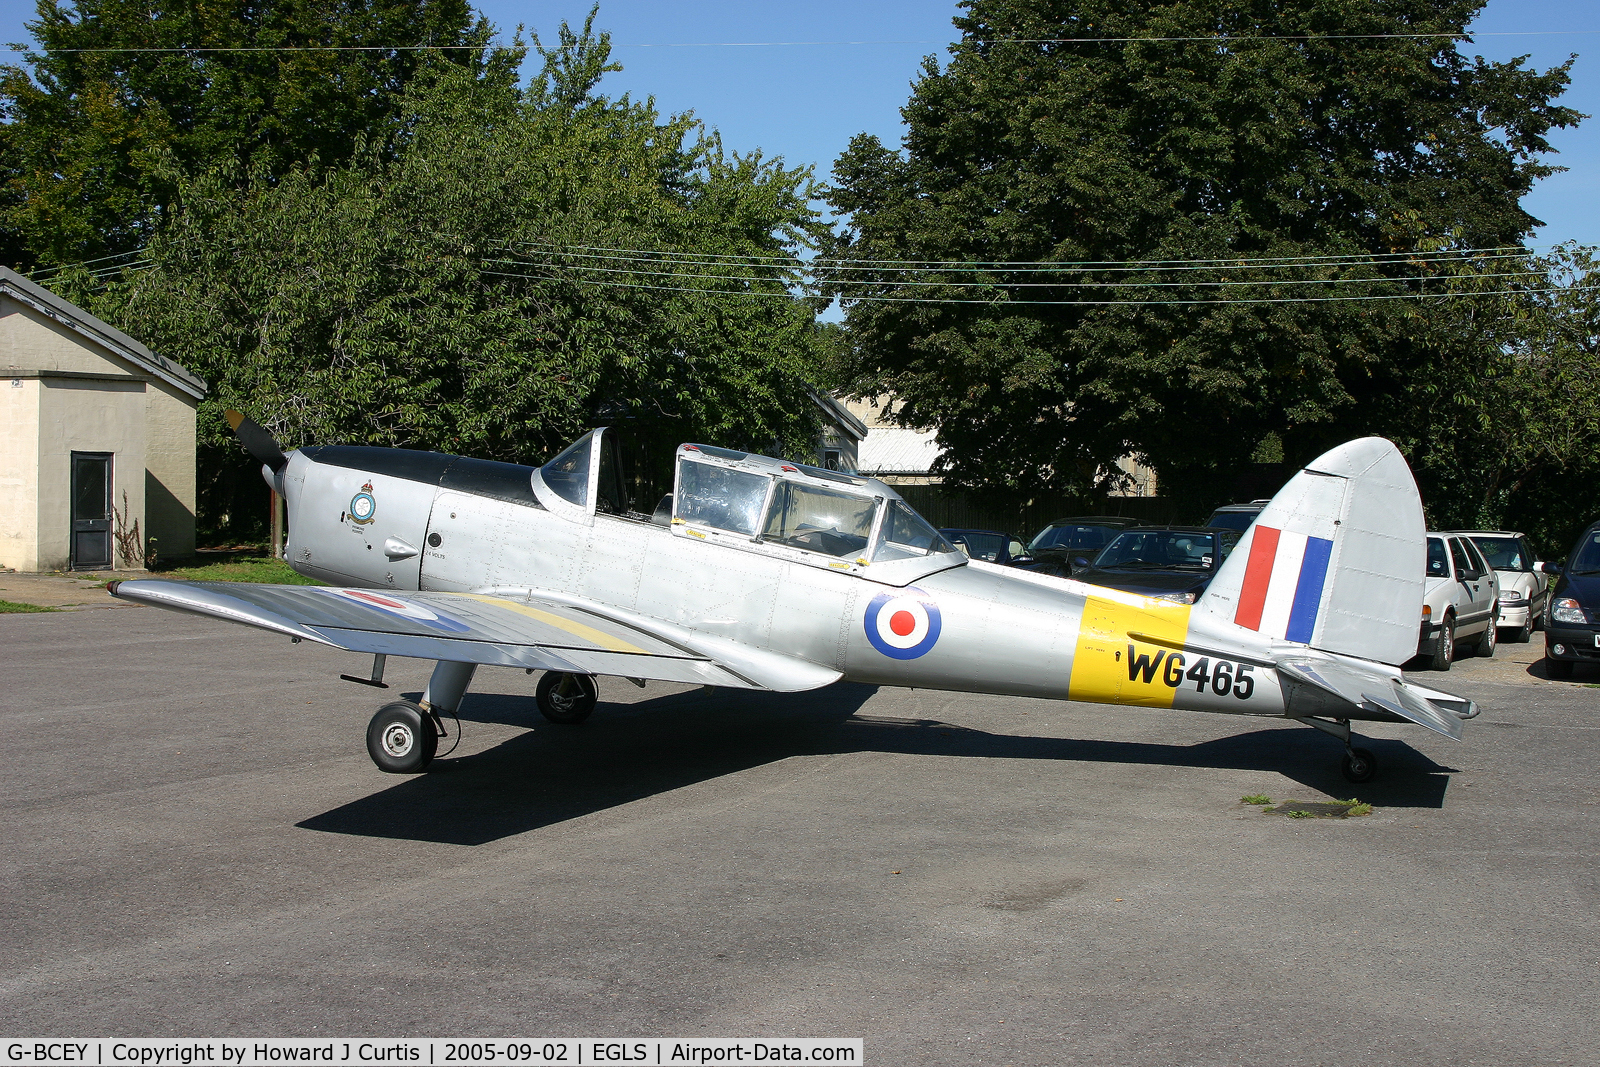 G-BCEY, 1951 De Havilland DHC-1 Chipmunk T.10 C/N C1/0515, Painted as WG465. Privately owned.